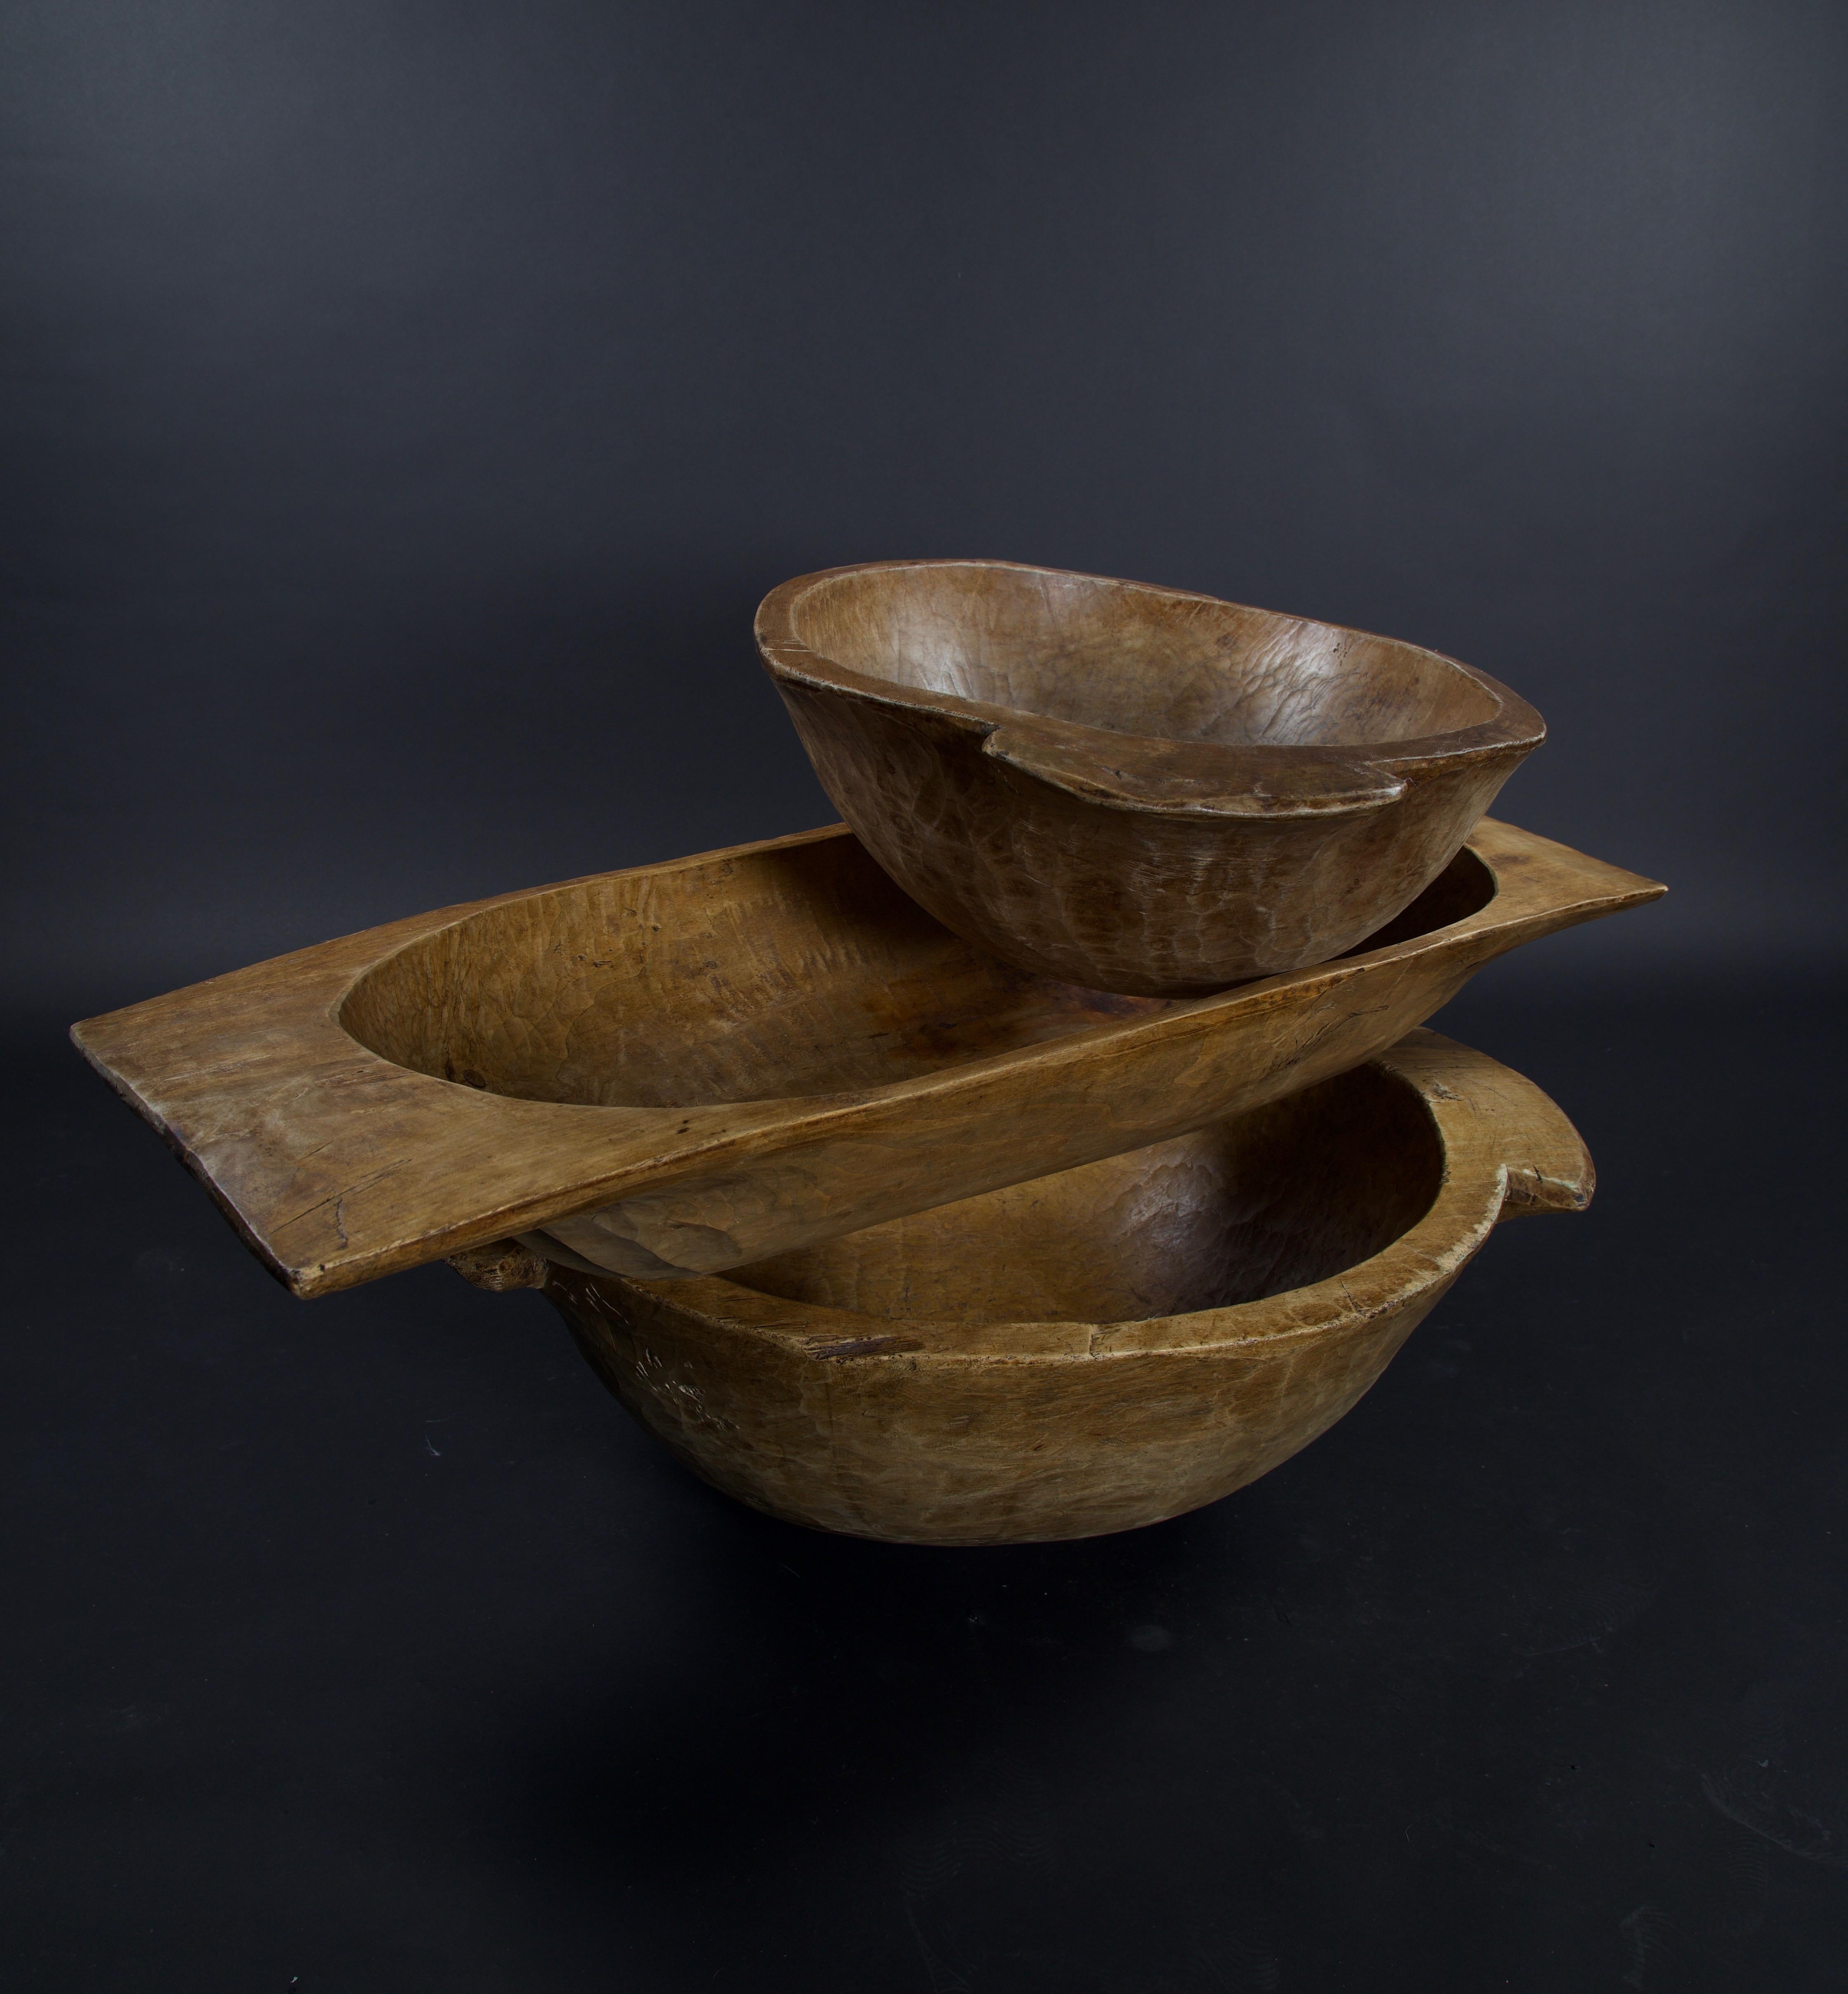 Most dough bowls we see today have a rounded out center, but originally the dough “bowl” was shaped more like a trough or trench.The term trencher comes from the Old French tranchier, which means to cut. In the Middle Ages a “trencher” was a hunk of